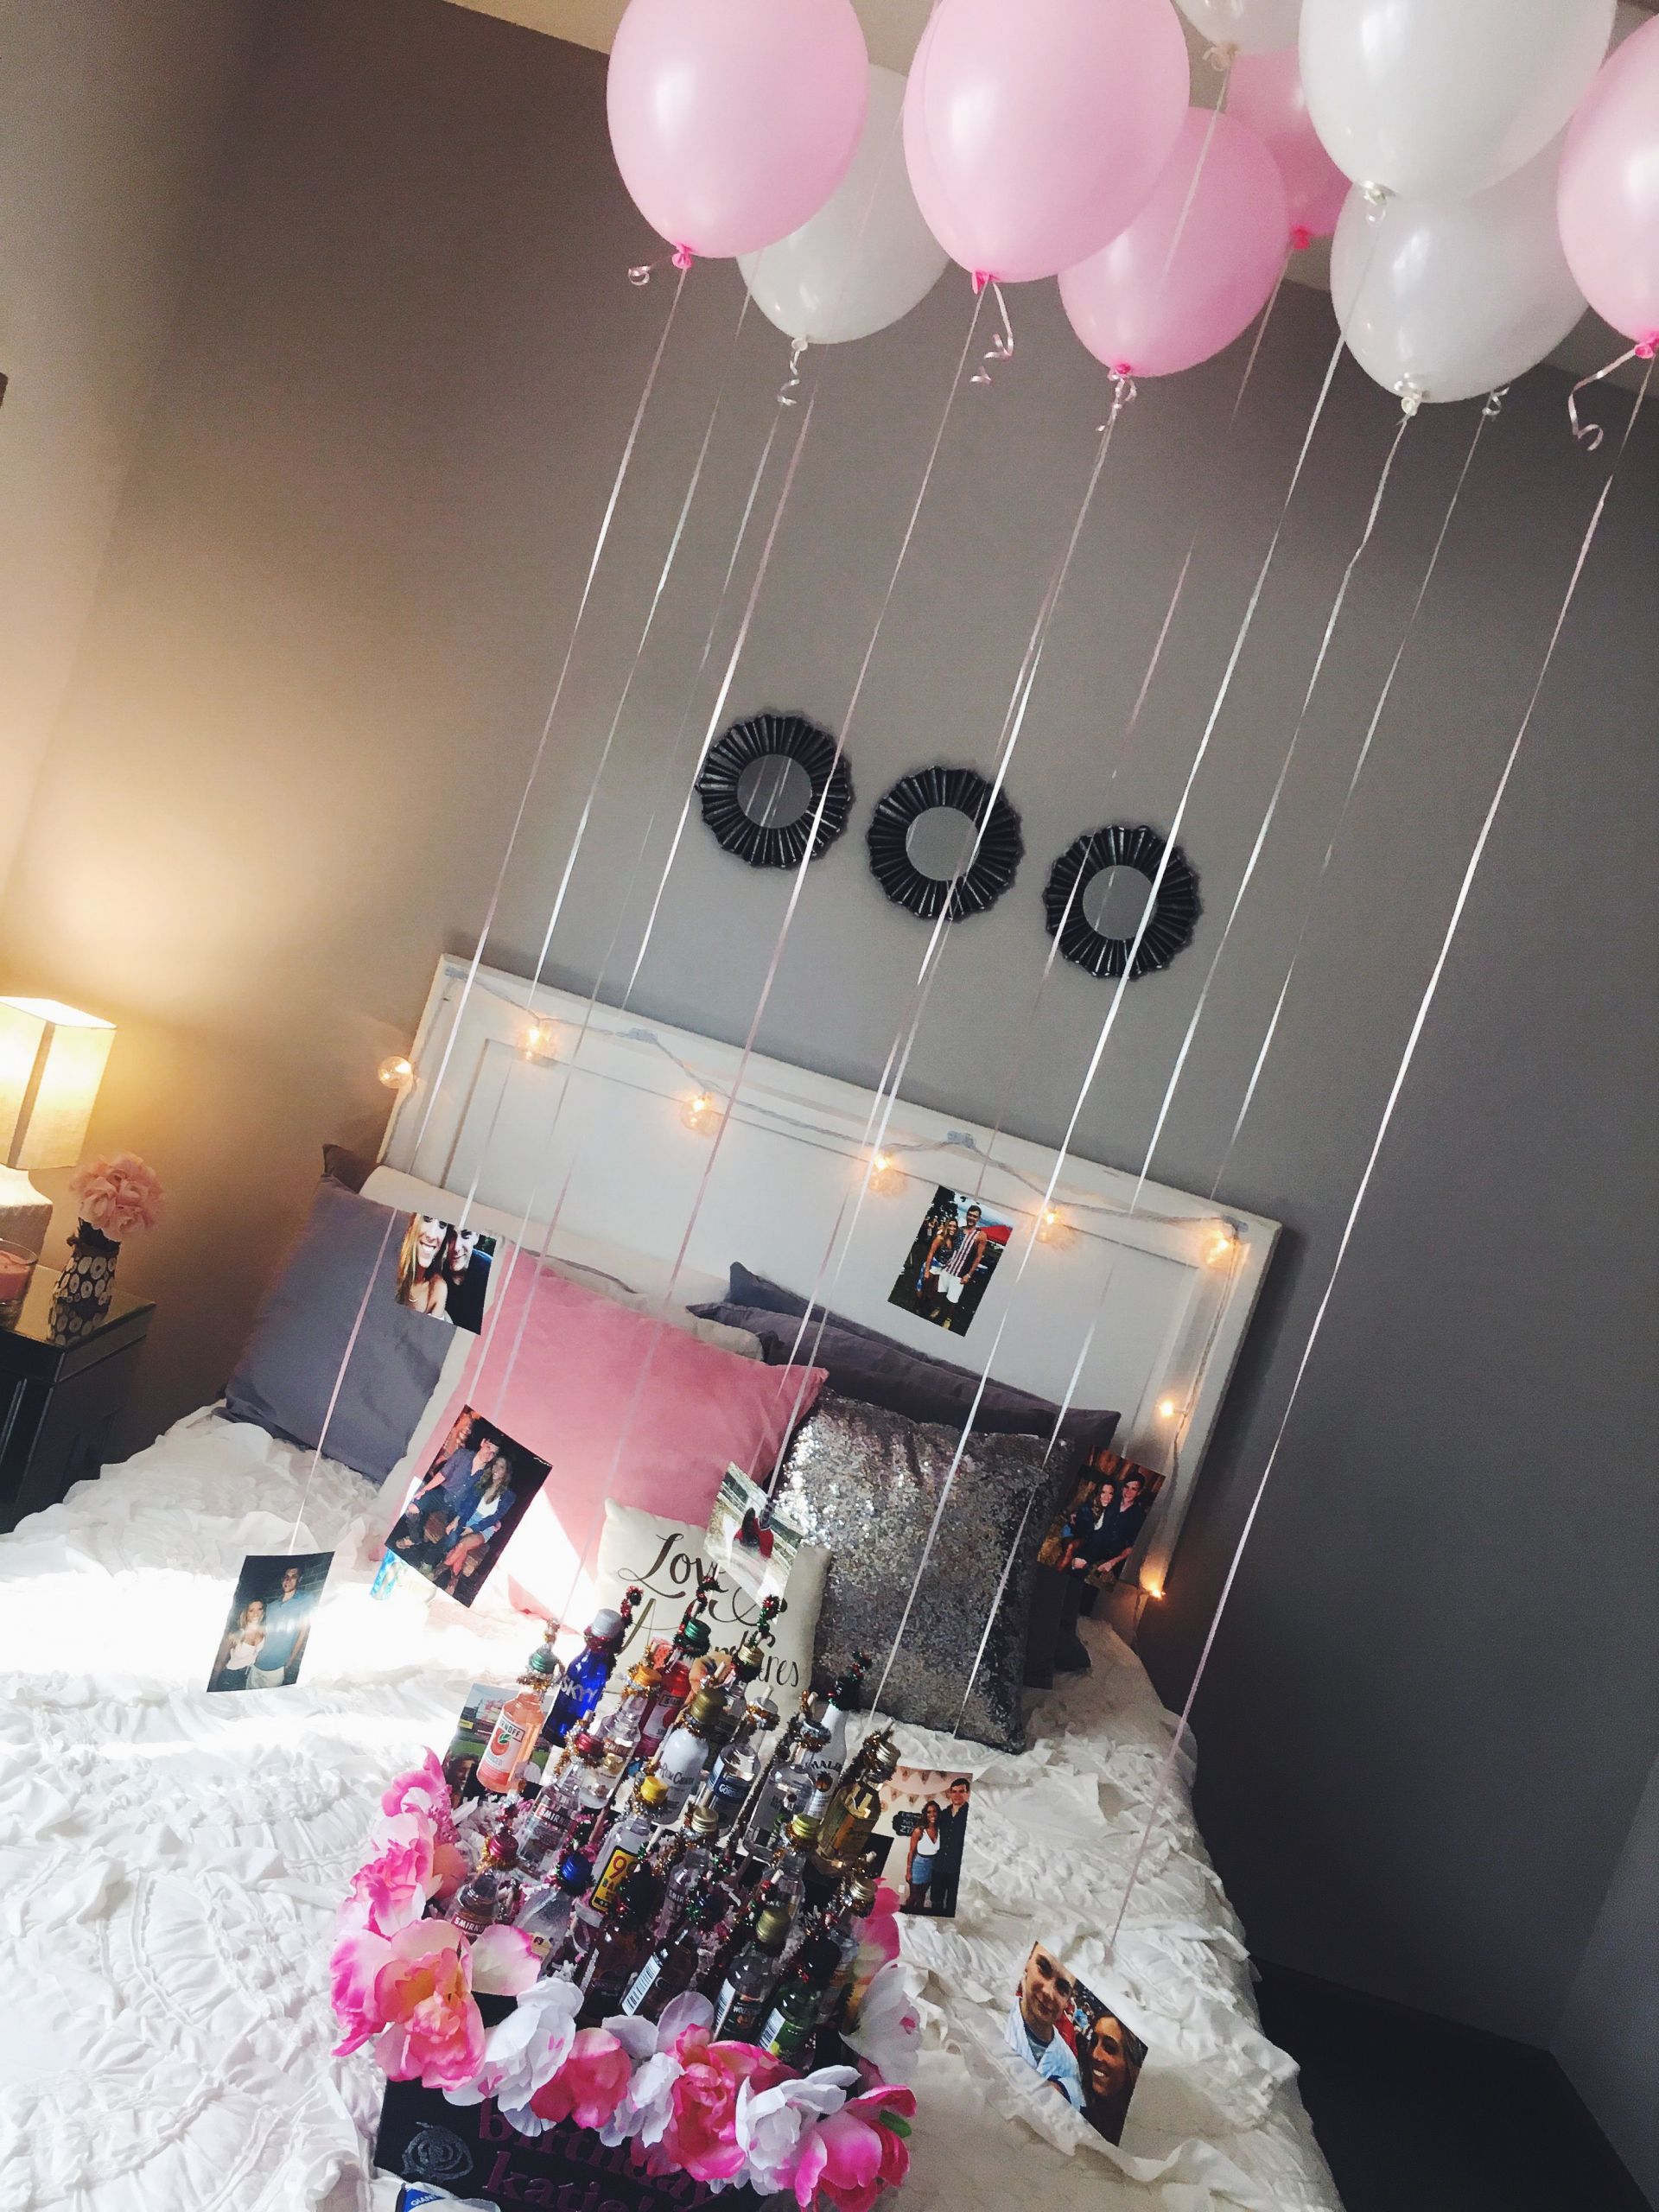 Cute Cheap Gift Ideas For Girlfriend
 easy and cute decorations for a friend or girlfriends 21st